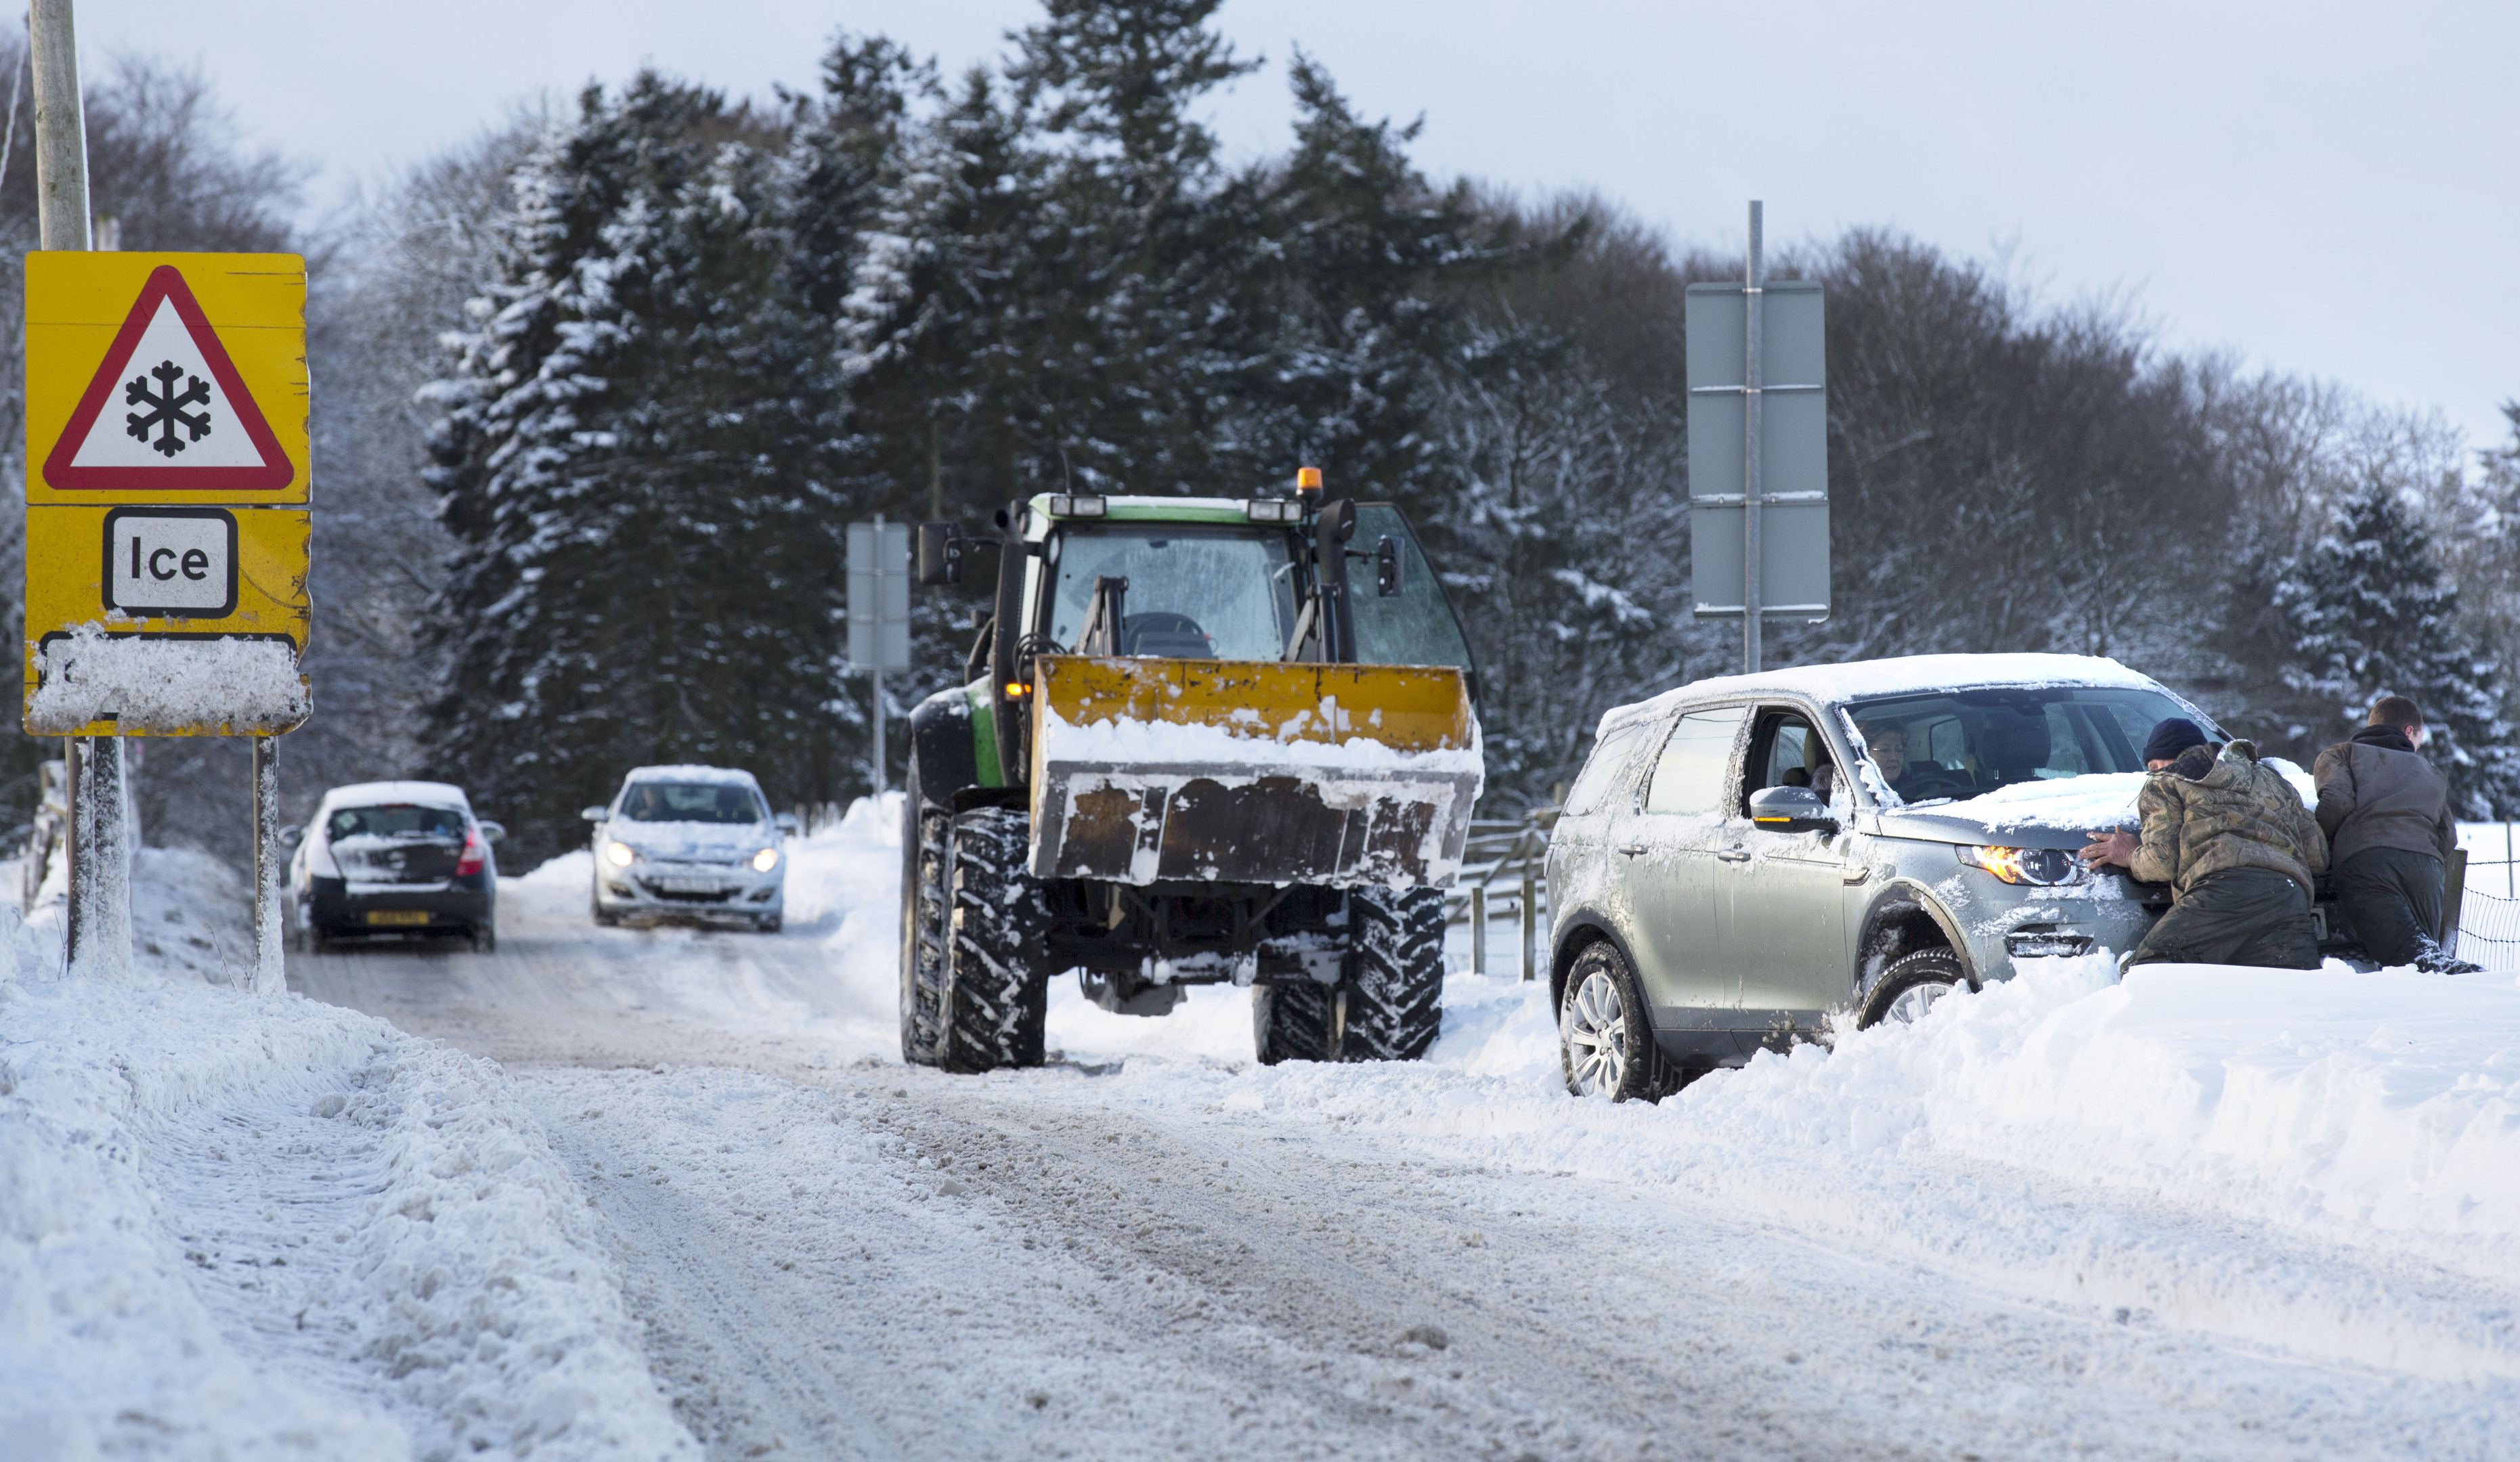 Drivers help to push a vehicle back on the road after heavy snow made road conditions difficult in Midlothian (David Cheskin/PA Wire)